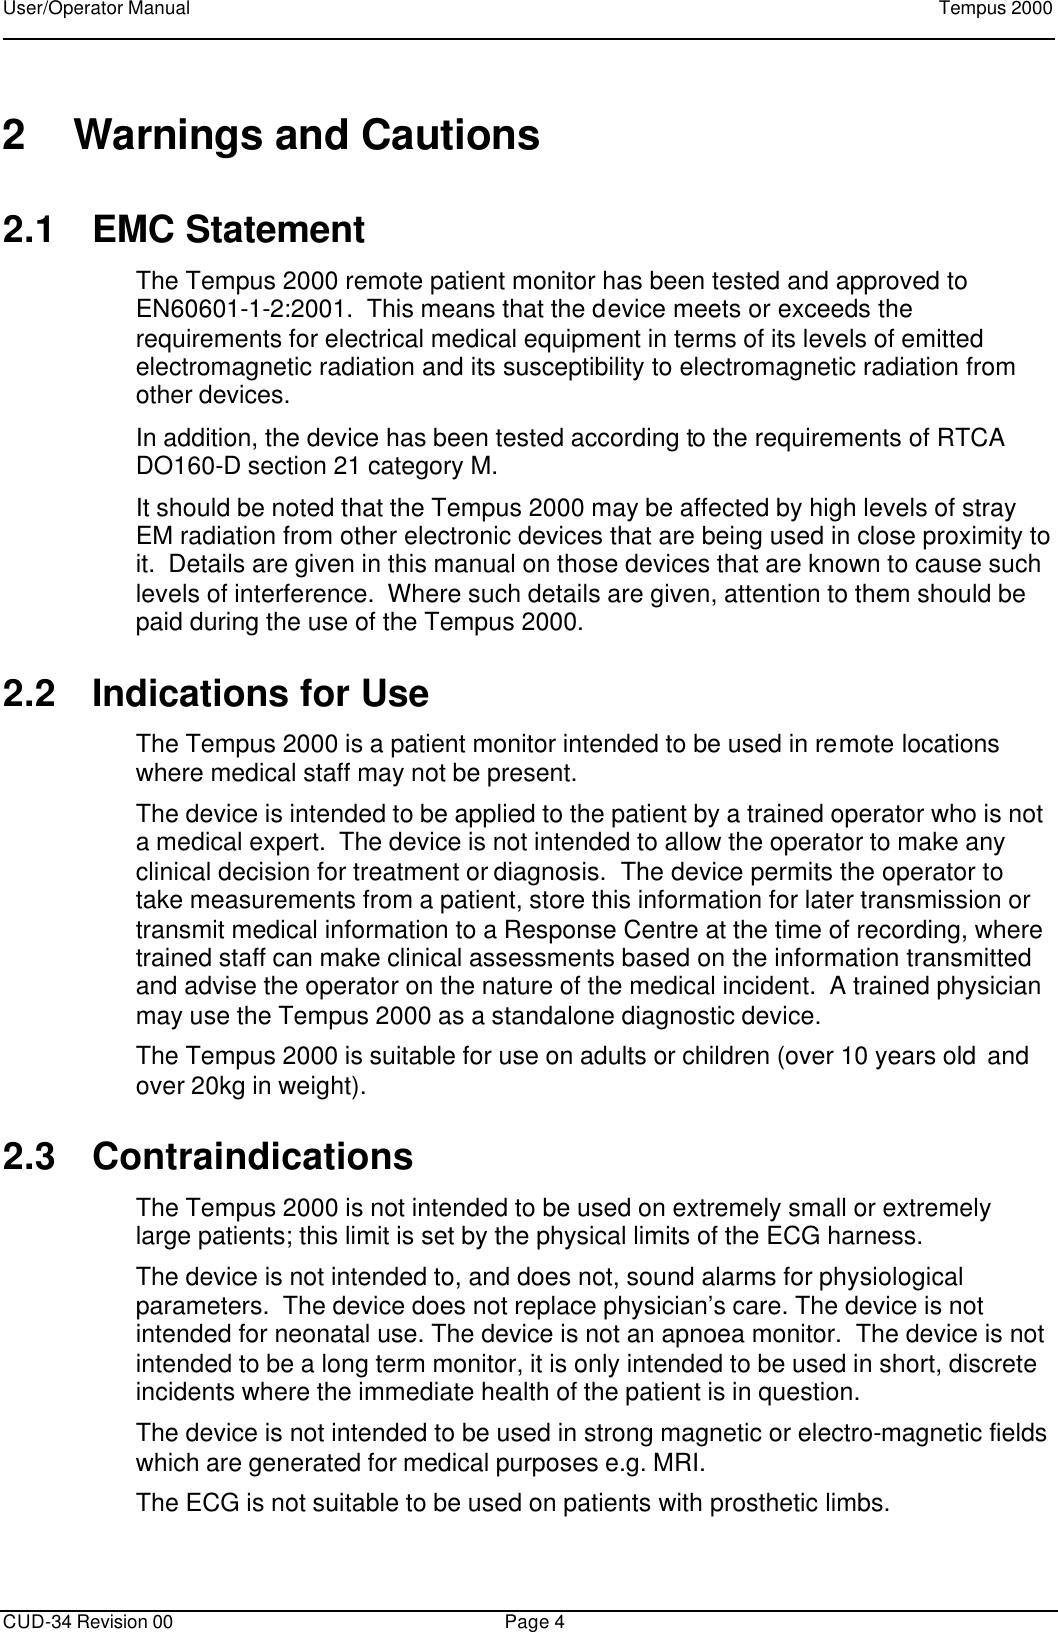 User/Operator Manual    Tempus 2000      CUD-34 Revision 00 Page 4  2 Warnings and Cautions 2.1 EMC Statement The Tempus 2000 remote patient monitor has been tested and approved to EN60601-1-2:2001.  This means that the device meets or exceeds the requirements for electrical medical equipment in terms of its levels of emitted electromagnetic radiation and its susceptibility to electromagnetic radiation from other devices. In addition, the device has been tested according to the requirements of RTCA DO160-D section 21 category M. It should be noted that the Tempus 2000 may be affected by high levels of stray EM radiation from other electronic devices that are being used in close proximity to it.  Details are given in this manual on those devices that are known to cause such levels of interference.  Where such details are given, attention to them should be paid during the use of the Tempus 2000. 2.2 Indications for Use The Tempus 2000 is a patient monitor intended to be used in remote locations where medical staff may not be present.  The device is intended to be applied to the patient by a trained operator who is not a medical expert.  The device is not intended to allow the operator to make any clinical decision for treatment or diagnosis.  The device permits the operator to take measurements from a patient, store this information for later transmission or transmit medical information to a Response Centre at the time of recording, where trained staff can make clinical assessments based on the information transmitted and advise the operator on the nature of the medical incident.  A trained physician may use the Tempus 2000 as a standalone diagnostic device. The Tempus 2000 is suitable for use on adults or children (over 10 years old and over 20kg in weight). 2.3 Contraindications The Tempus 2000 is not intended to be used on extremely small or extremely large patients; this limit is set by the physical limits of the ECG harness. The device is not intended to, and does not, sound alarms for physiological parameters.  The device does not replace physician’s care. The device is not intended for neonatal use. The device is not an apnoea monitor.  The device is not intended to be a long term monitor, it is only intended to be used in short, discrete incidents where the immediate health of the patient is in question. The device is not intended to be used in strong magnetic or electro-magnetic fields which are generated for medical purposes e.g. MRI. The ECG is not suitable to be used on patients with prosthetic limbs. 